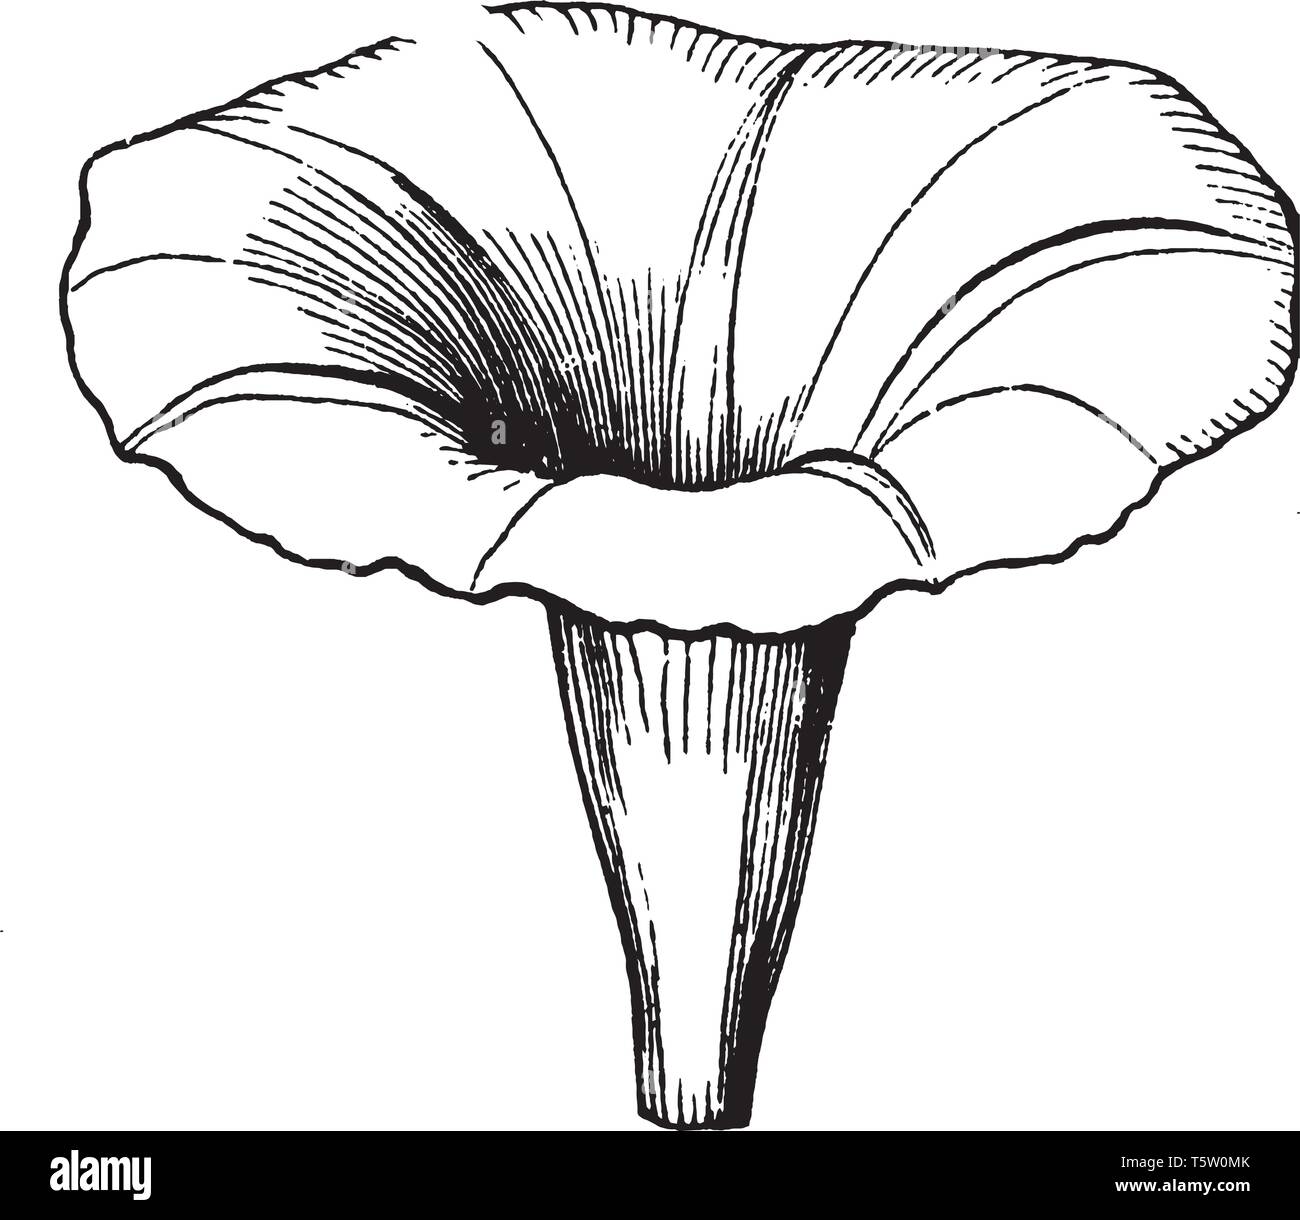 An image of a Morning Glory Corolla flower which is the inner circle of the parts of the flowers, composed of petals, vintage line drawing or engravin Stock Vector